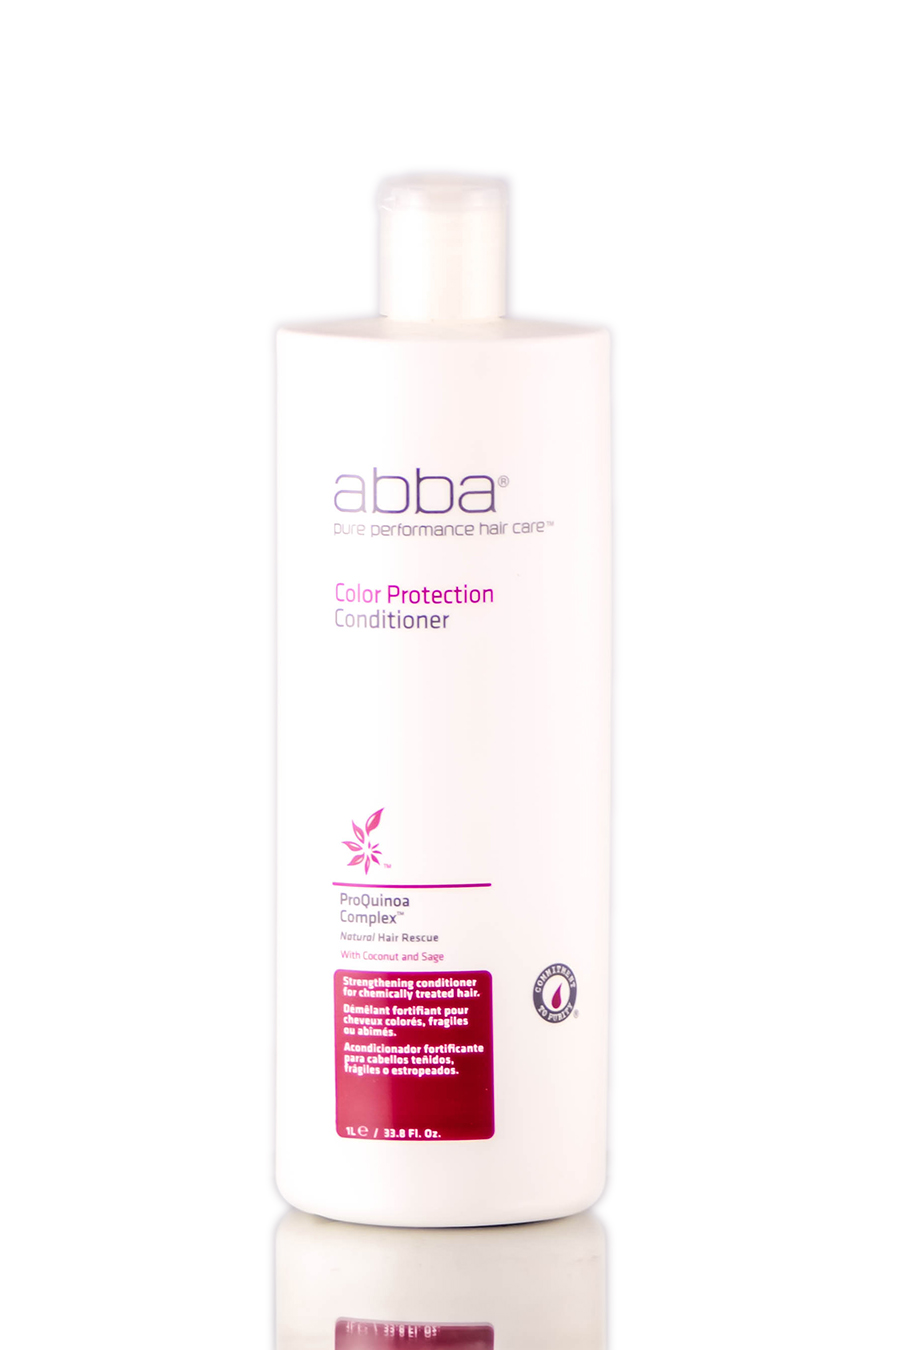 Abba Pure Color Protection Conditioner - 33.8 oz / liter - Pack of 2 with Sleek Comb - image 1 of 1